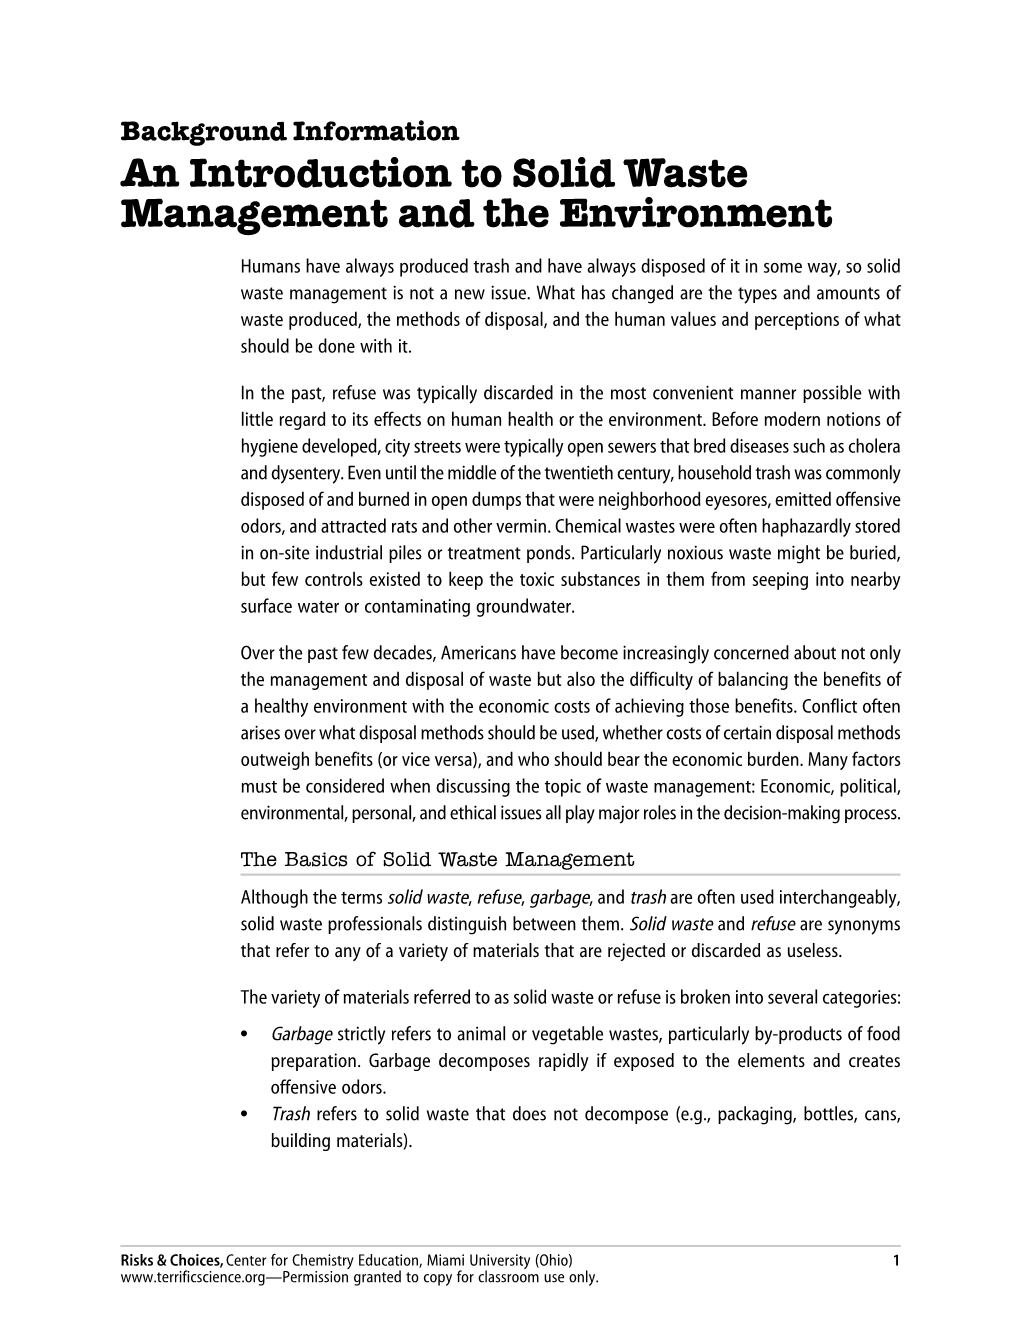 An Introduction to Solid Waste Management and the Environment